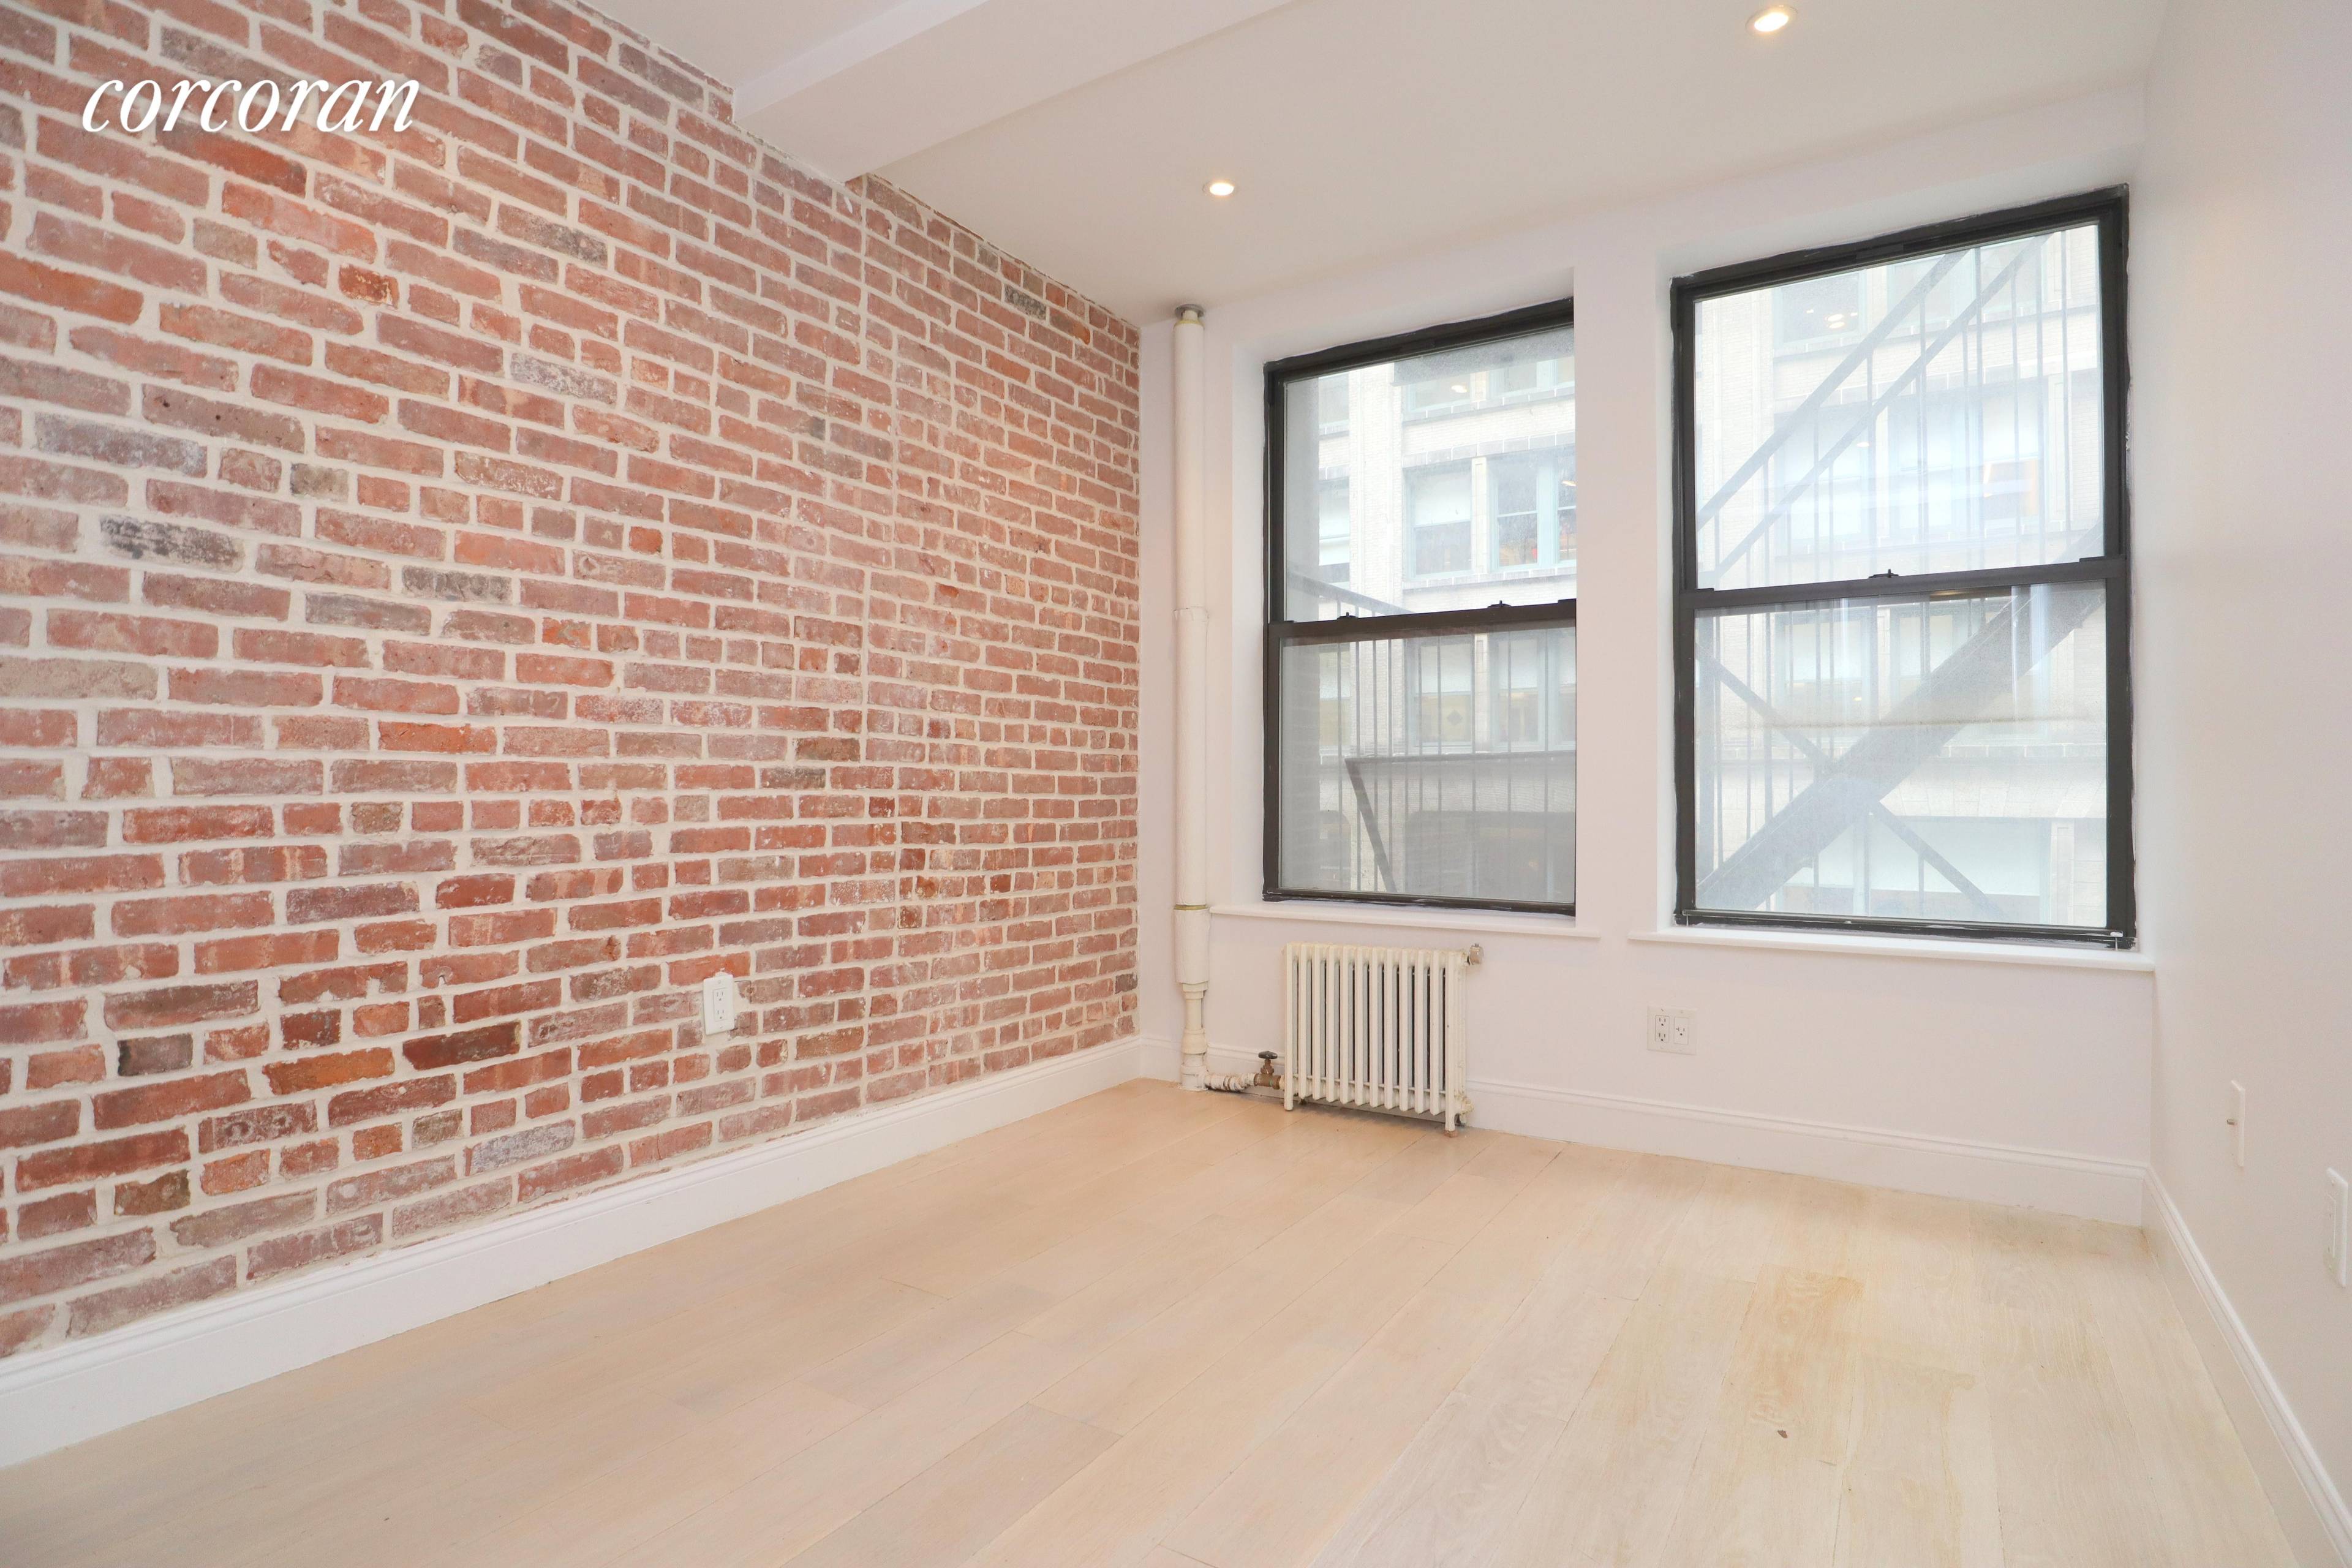 Modern 3 bed, 1 bath with laundry in unit, situated in elevator building, in heart of Flatiron, by many transportation options.